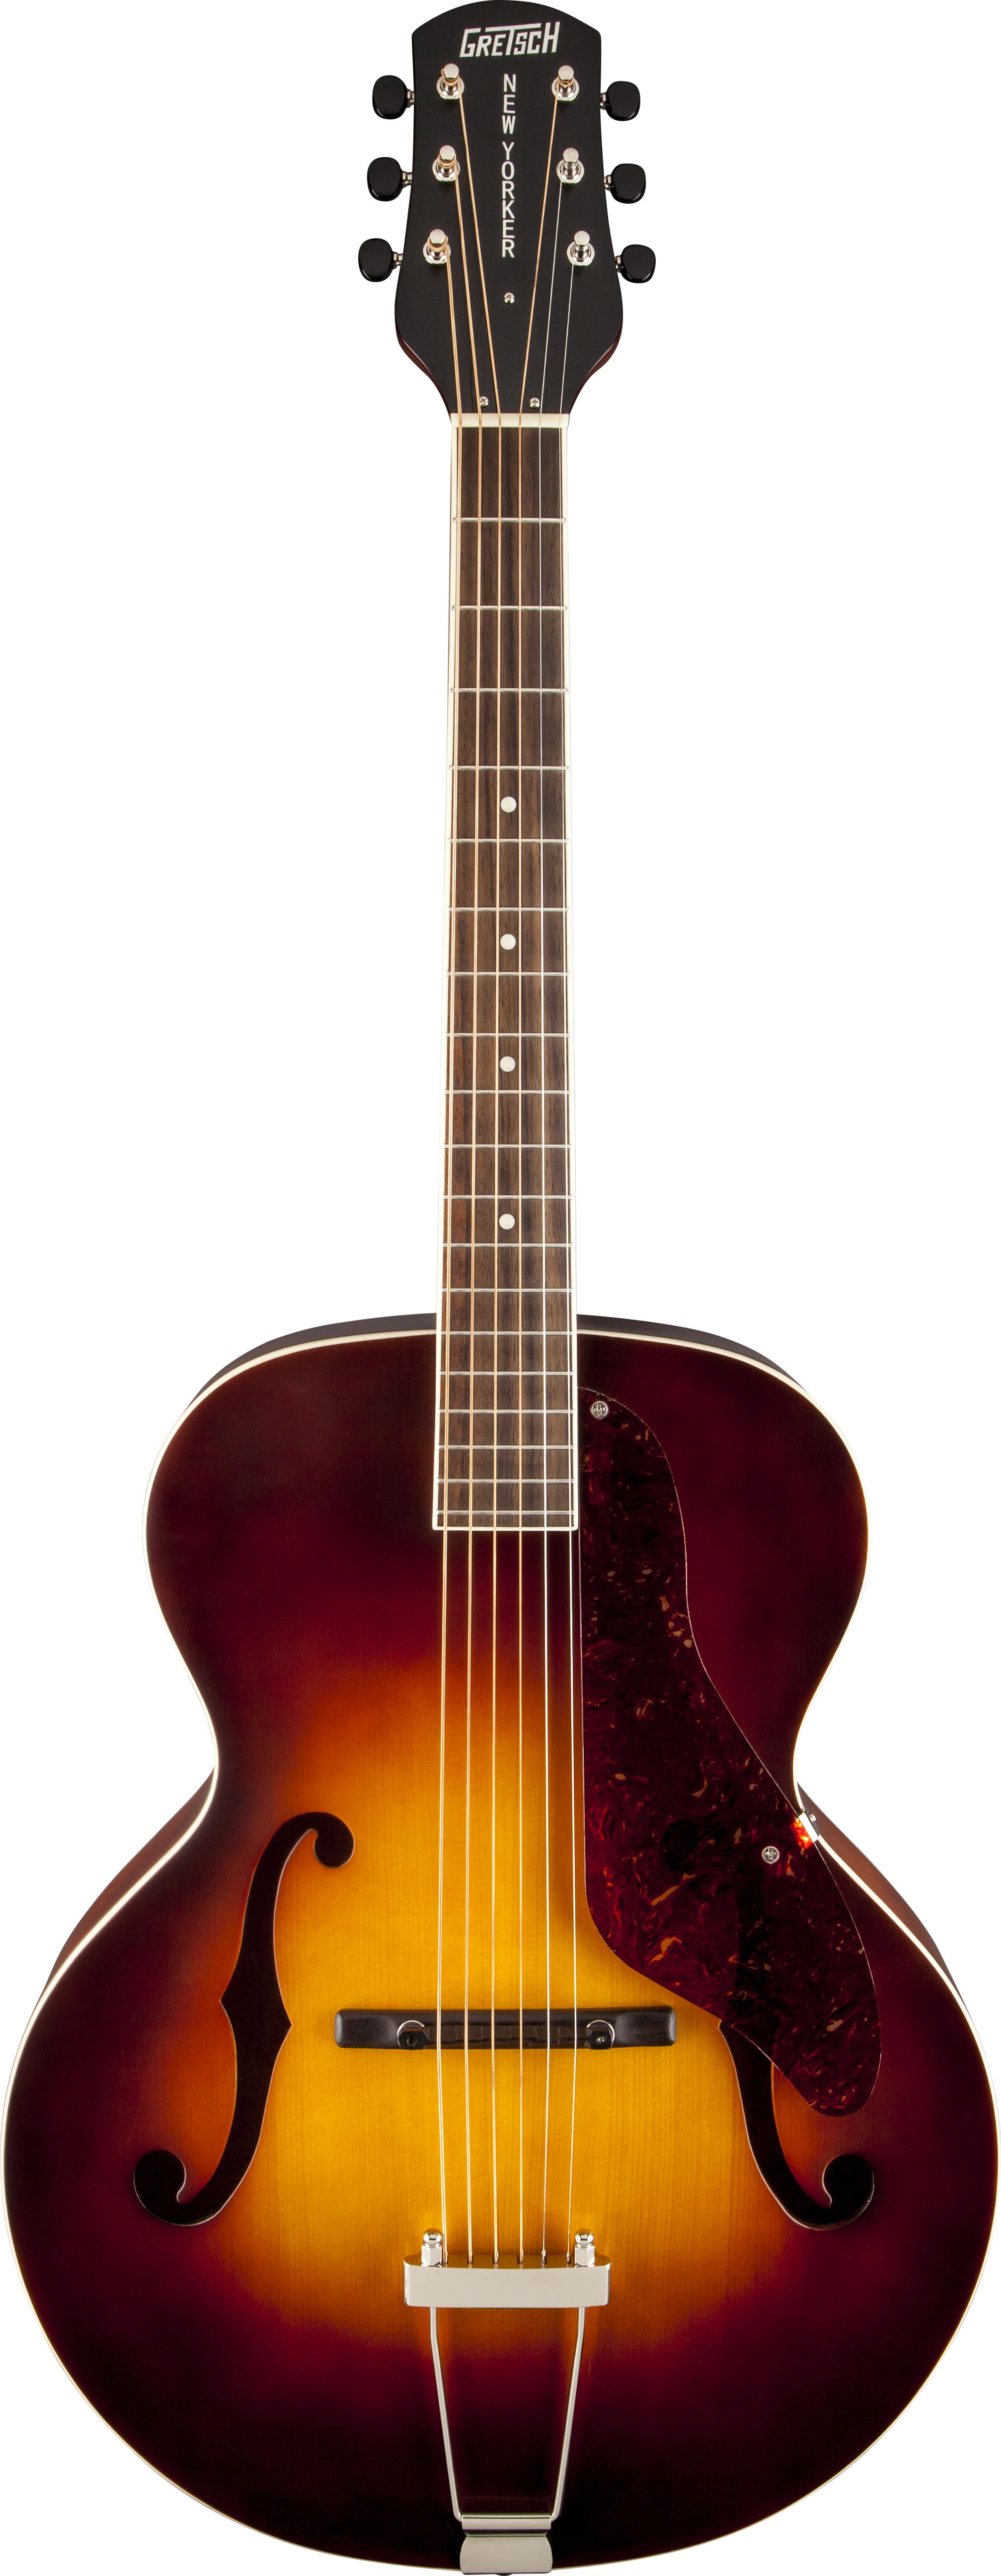 Gretsch Introduces New and Improved 2014 Roots Collection